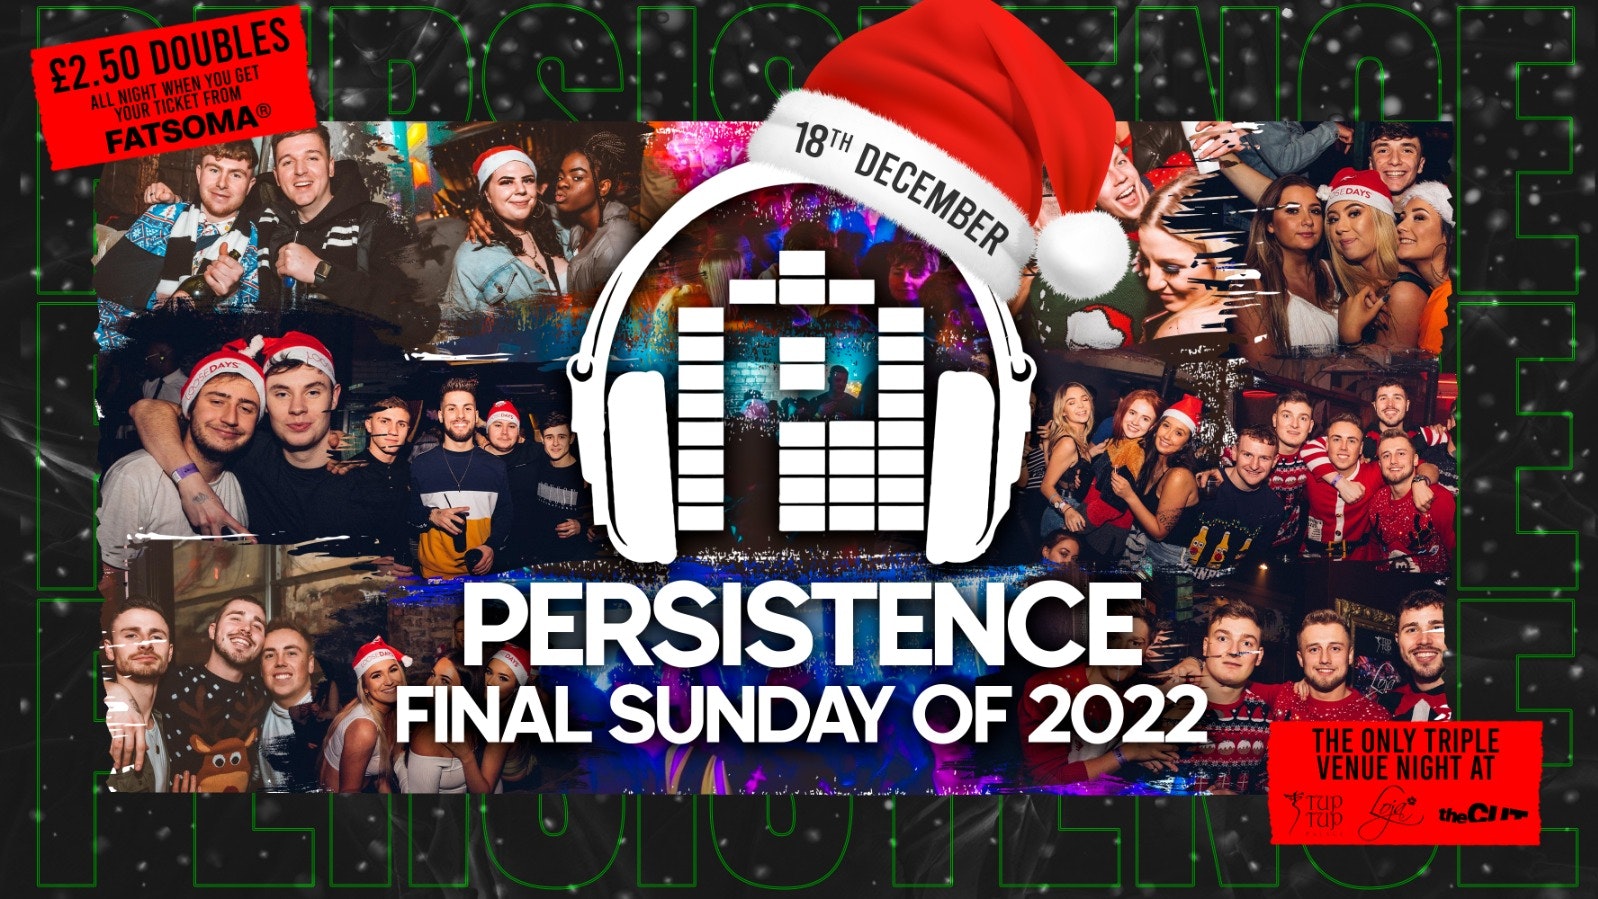 PERSISTENCE | FINAL SUNDAY OF 2022! | £2.50 DOUBLES WITH A TICKET! | TUP TUP PALACE, LOJA & THE CUT | 18th DECEMBER